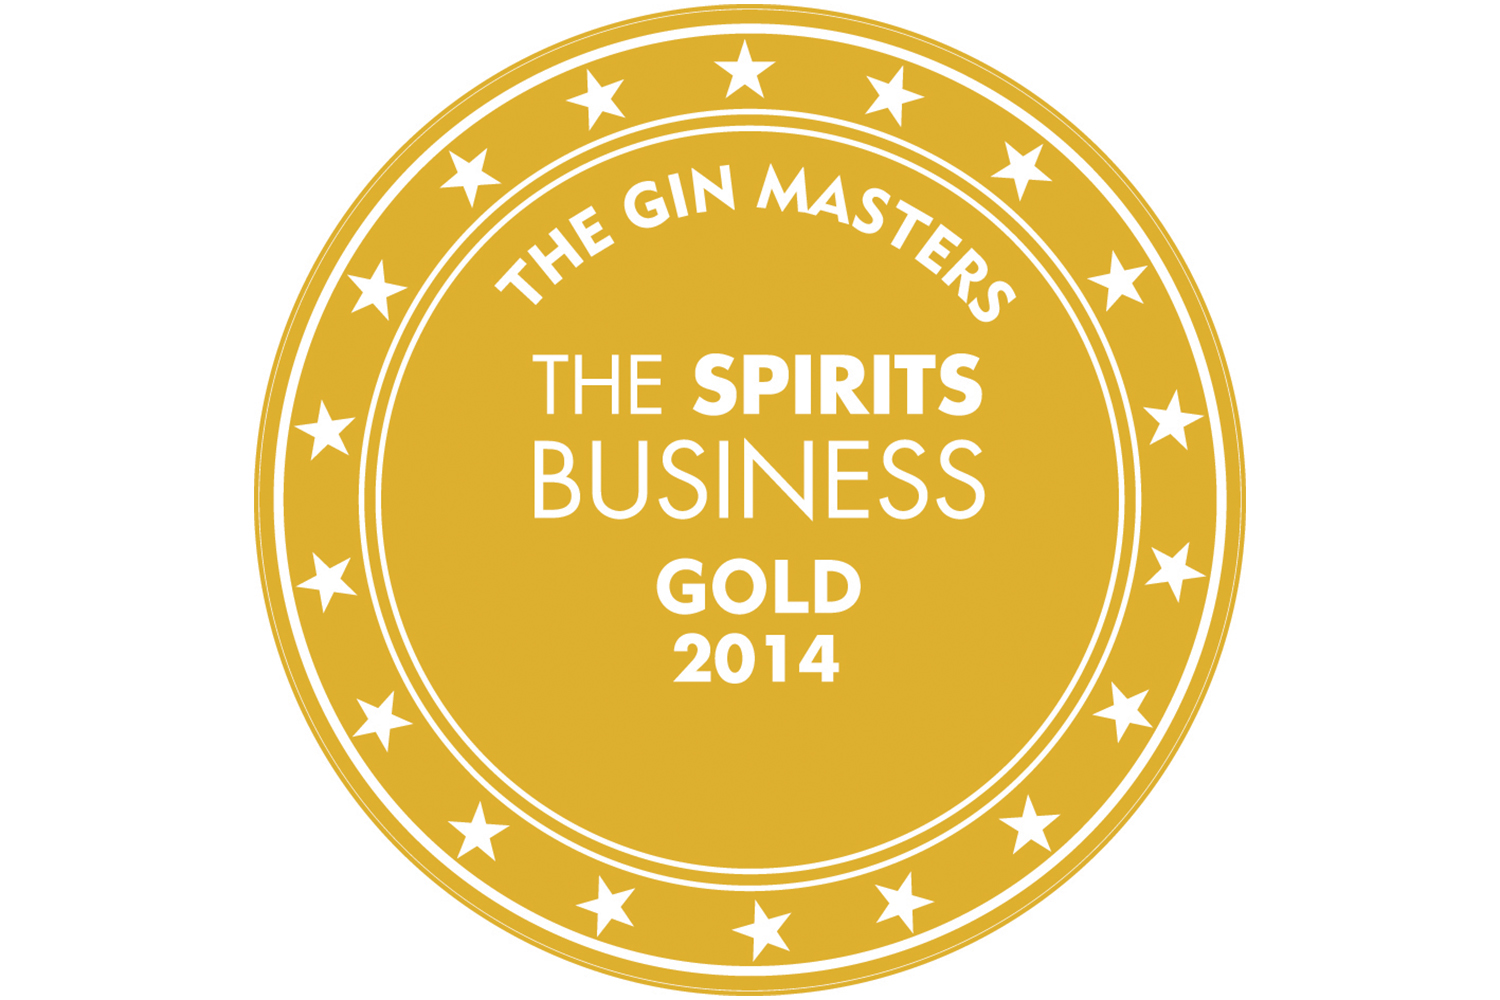 Shortcross awarded gold & silver medals at the gin masters 2014